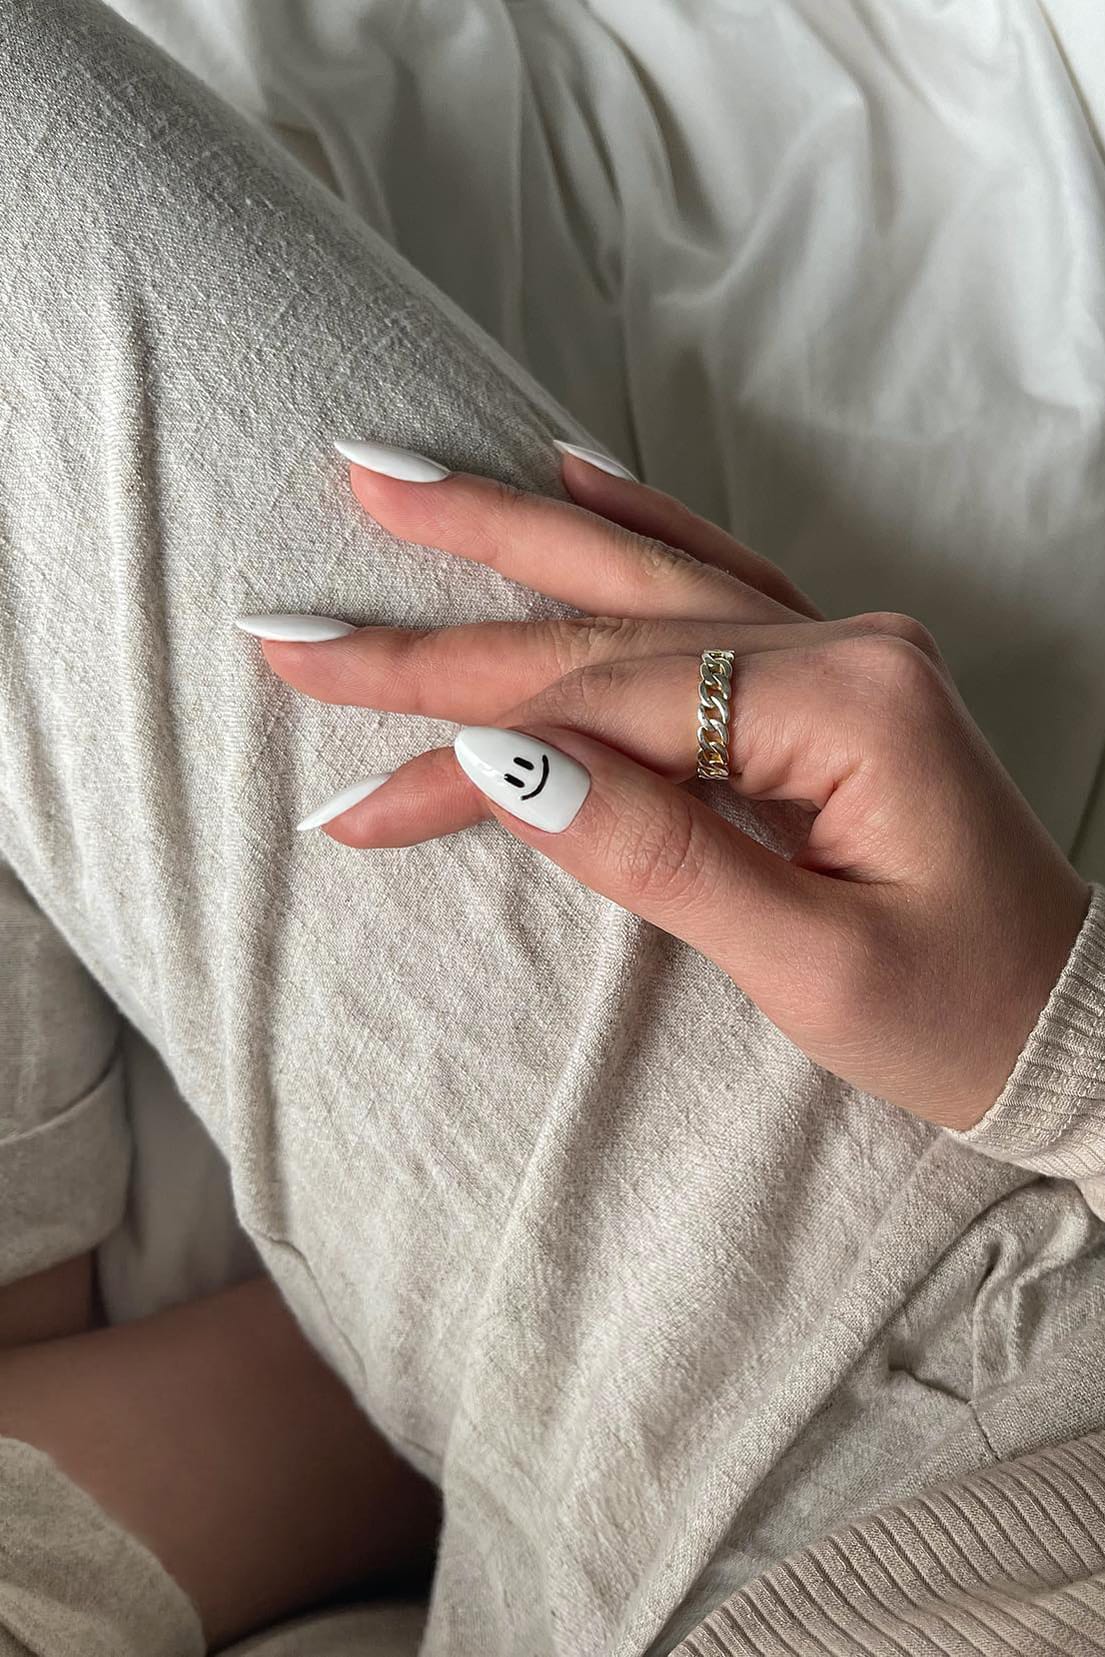 Super Simple Black And White Smiley Face Nails